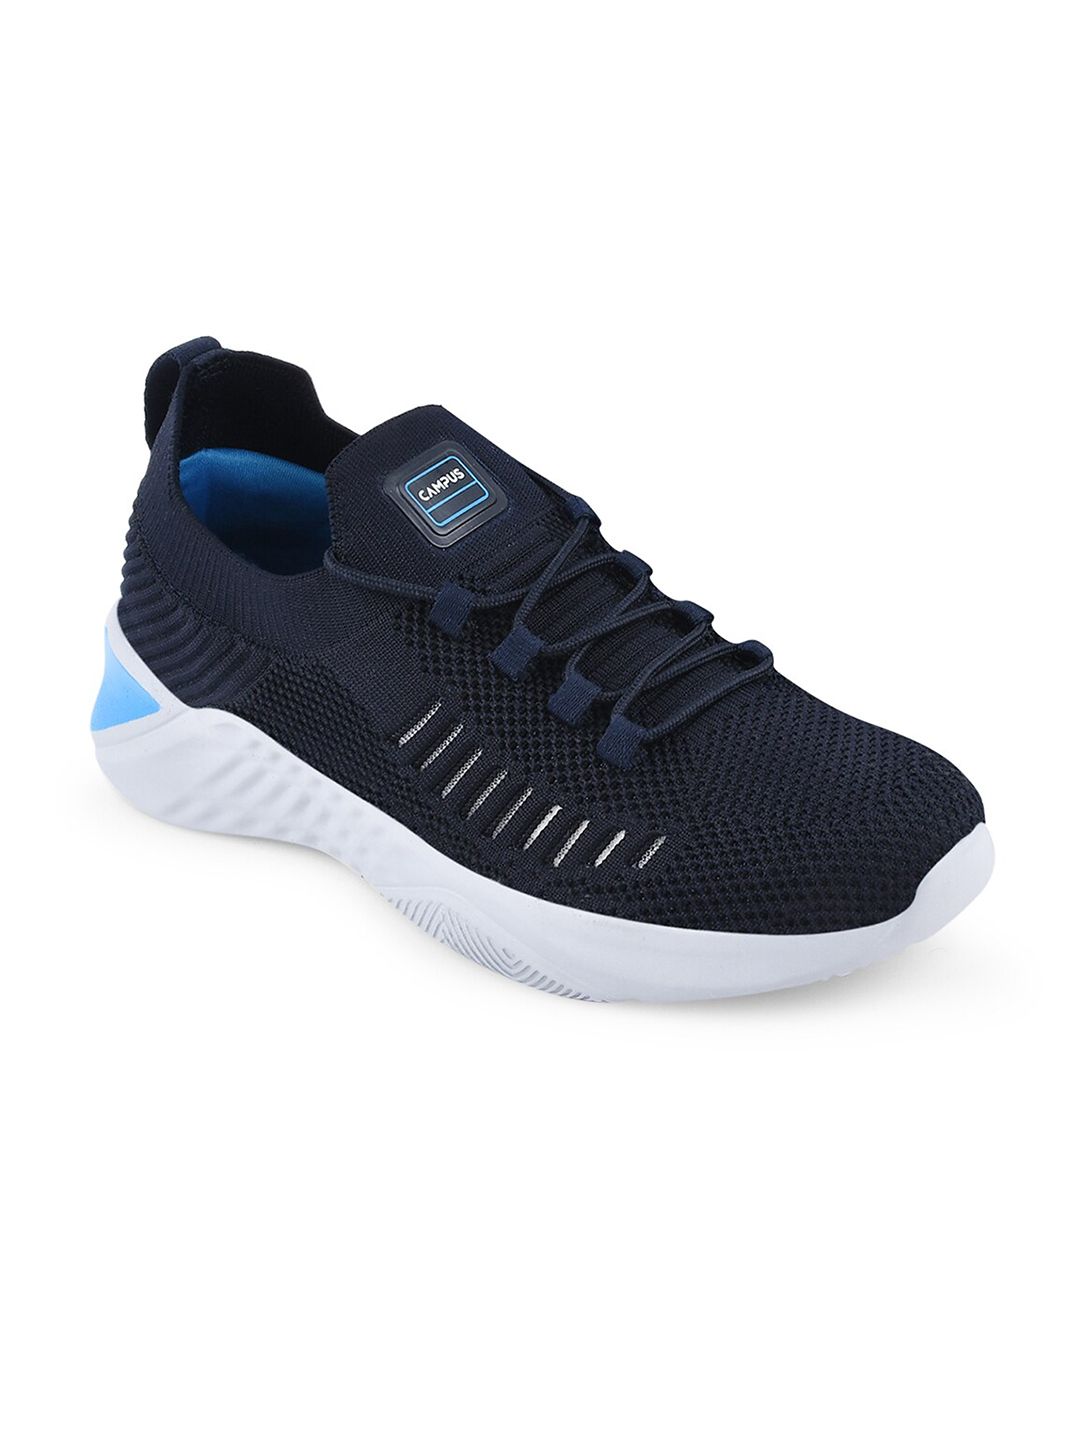 Campus Women Blue Mesh Running Shoes Price in India